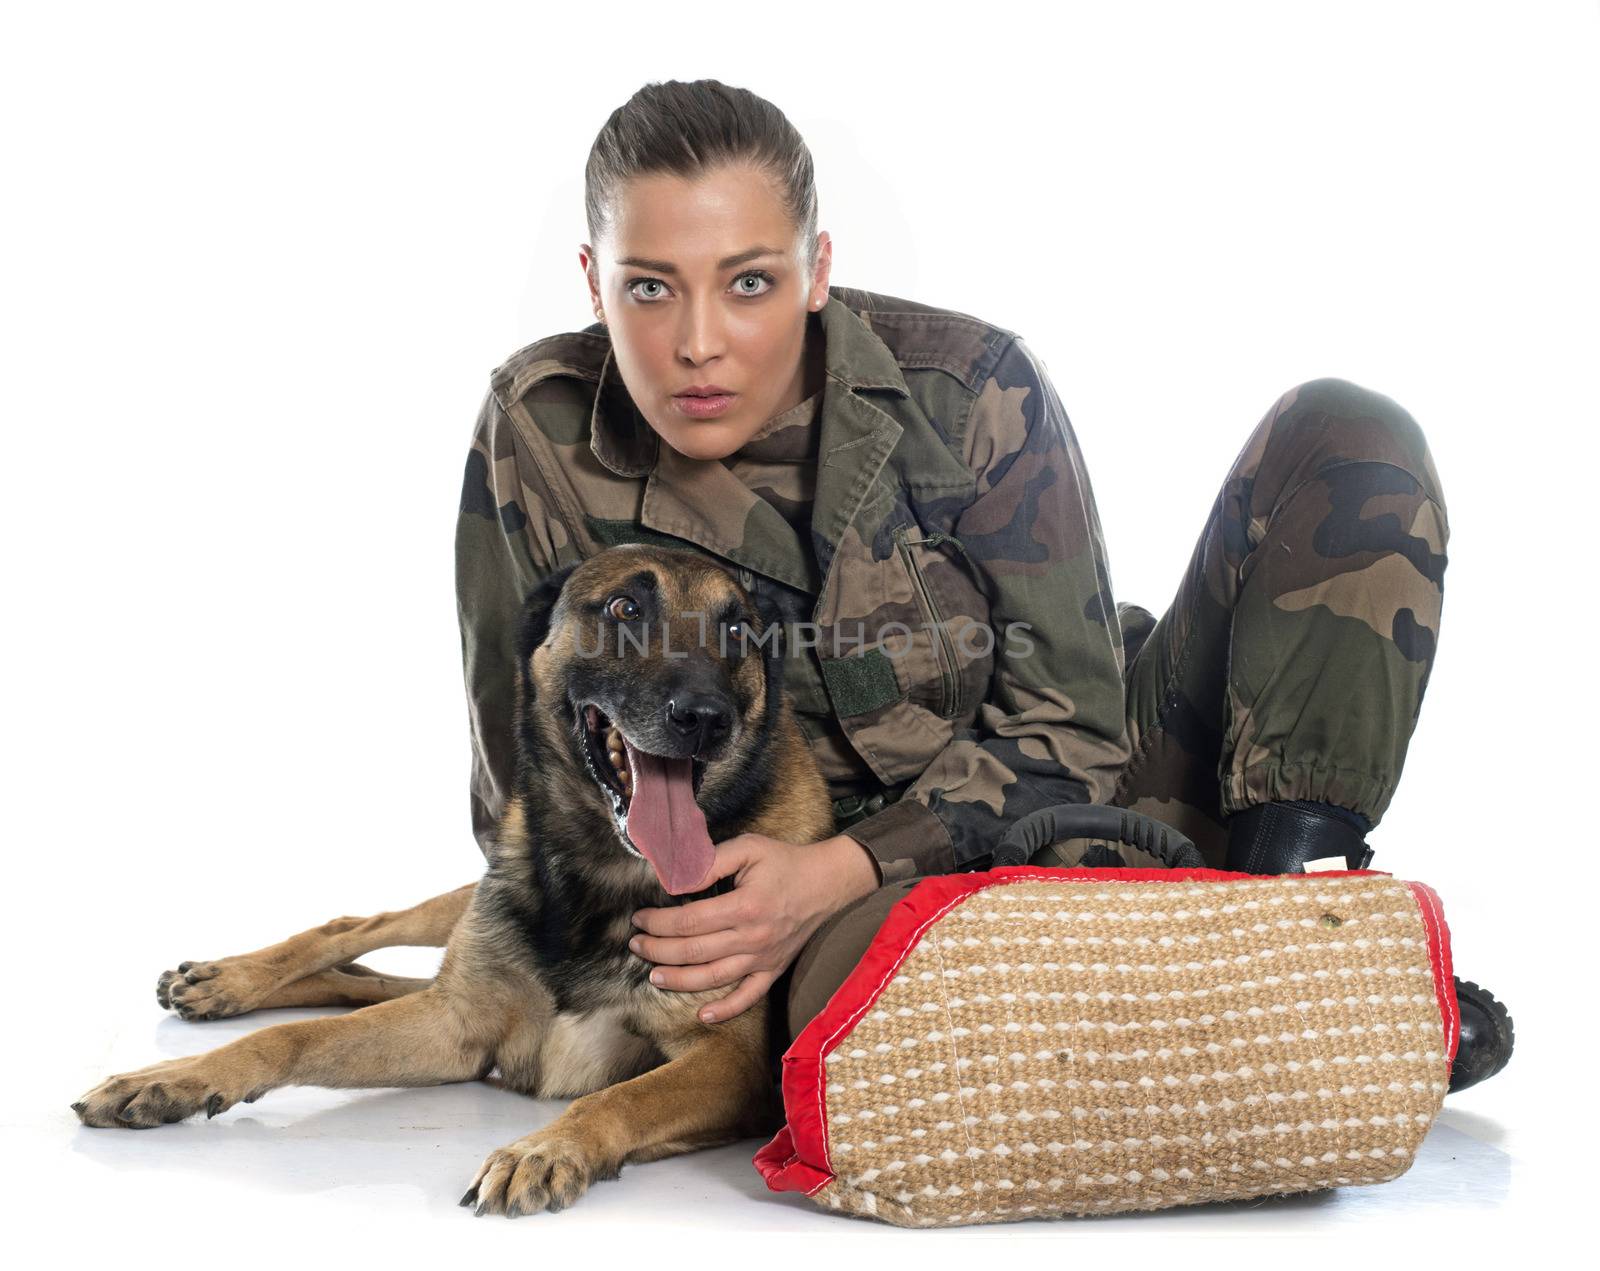 woman soldier and malinois by cynoclub